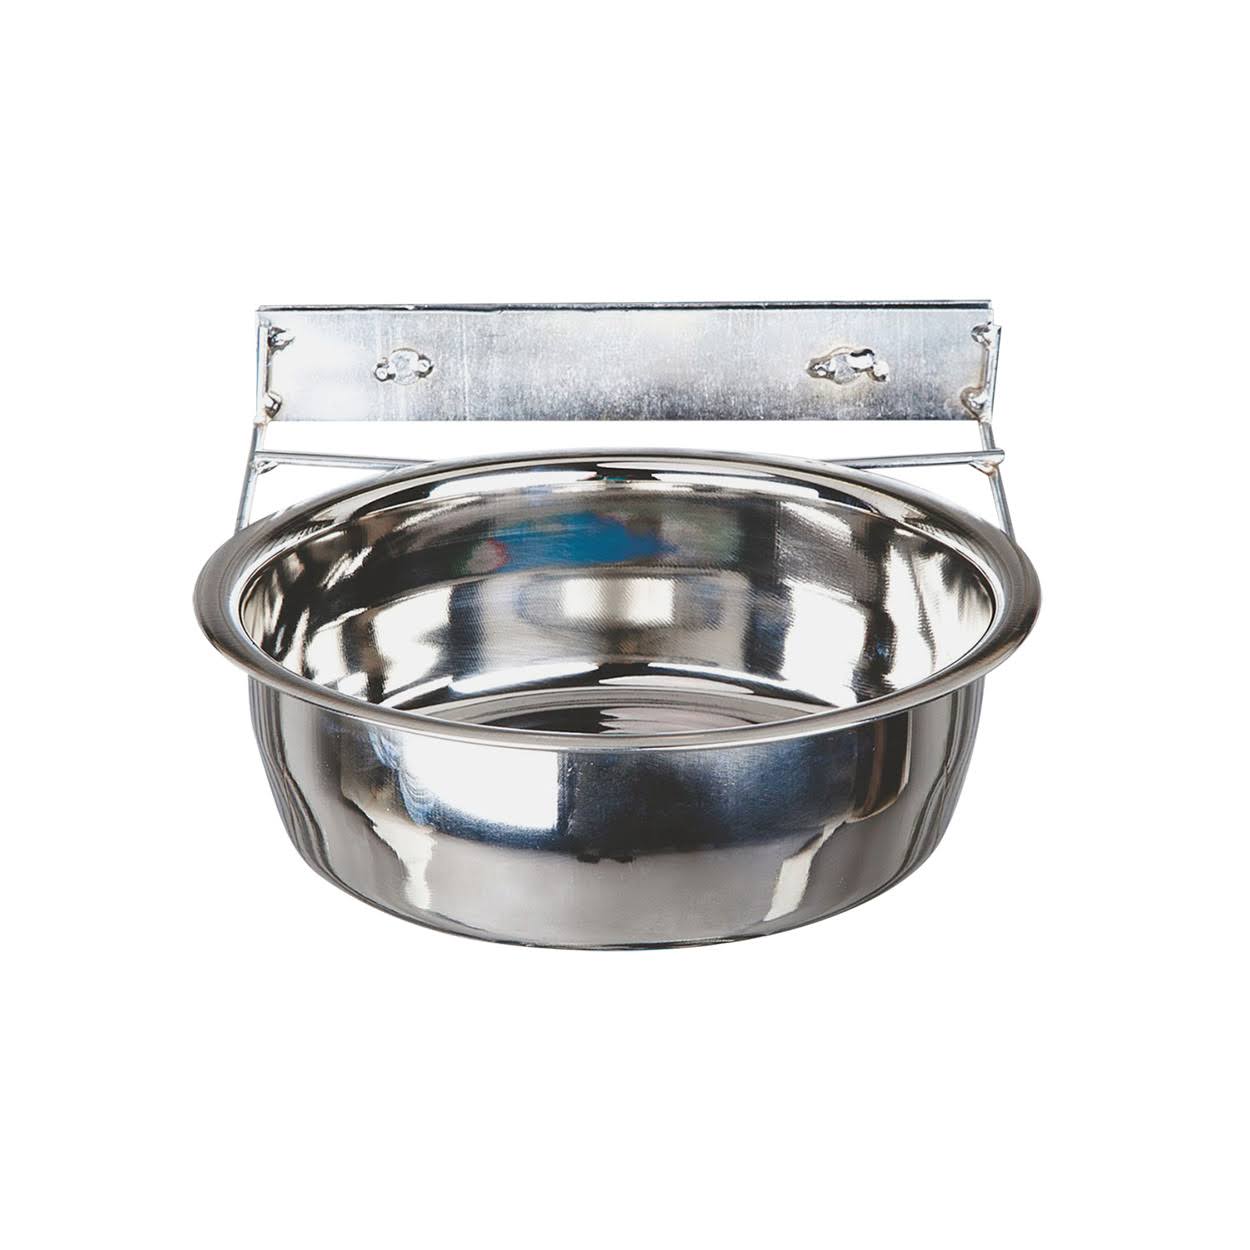 Advance Pet Products Coop Cups With Clamp - Stainless Steel